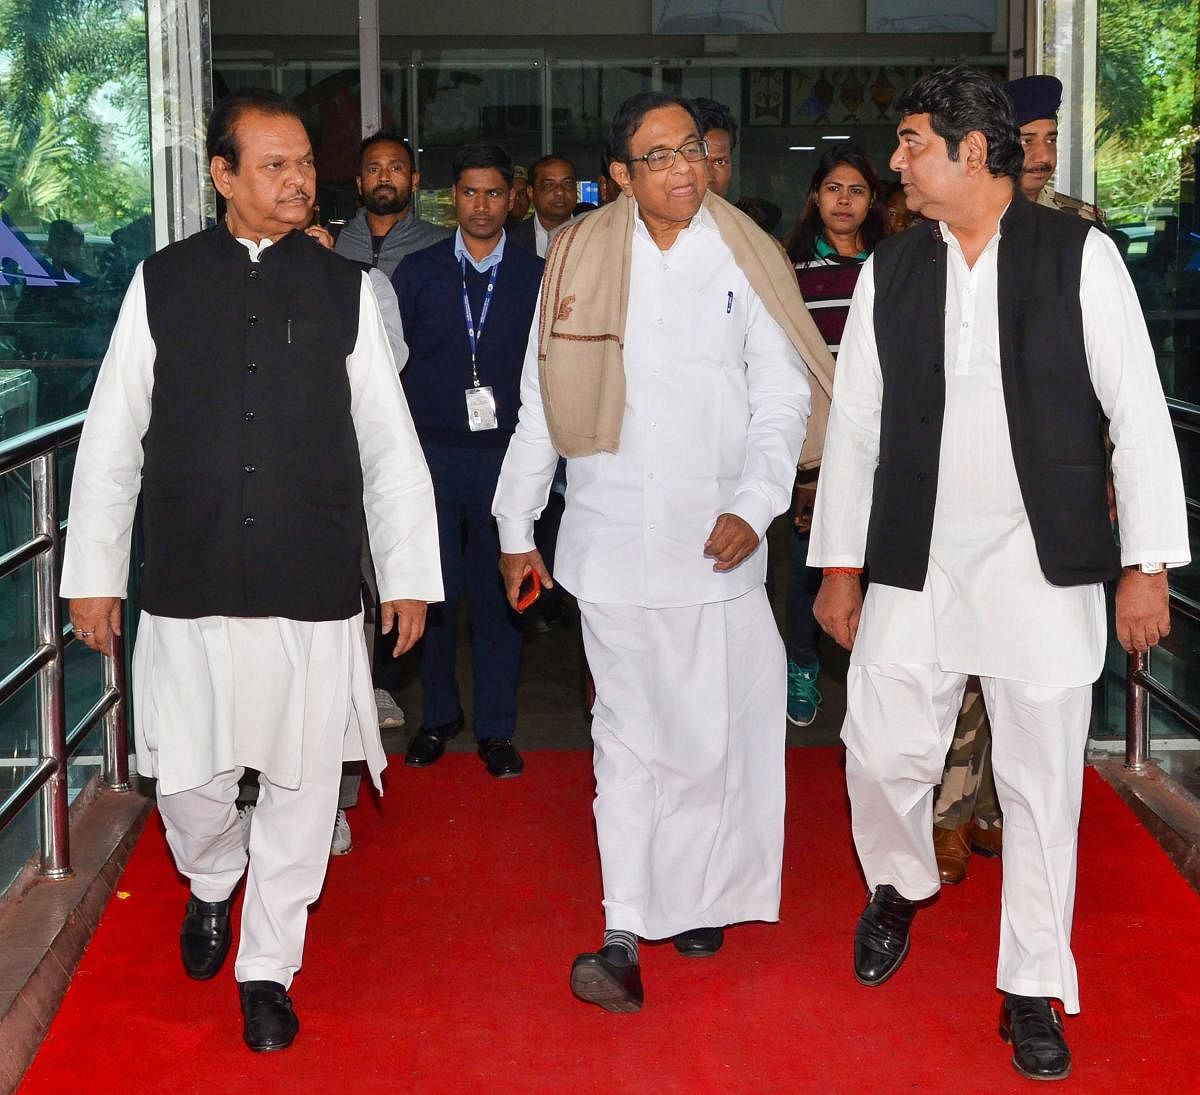 Ranchi: Senior Congress leader and former finance minister P Chidambaram is greets by party leaders on his arrival at Birsa Munda International Airport, in Ranchi, Friday, Dec. 6, 2019. (PTI Photo)(PTI12_6_2019_000058B)